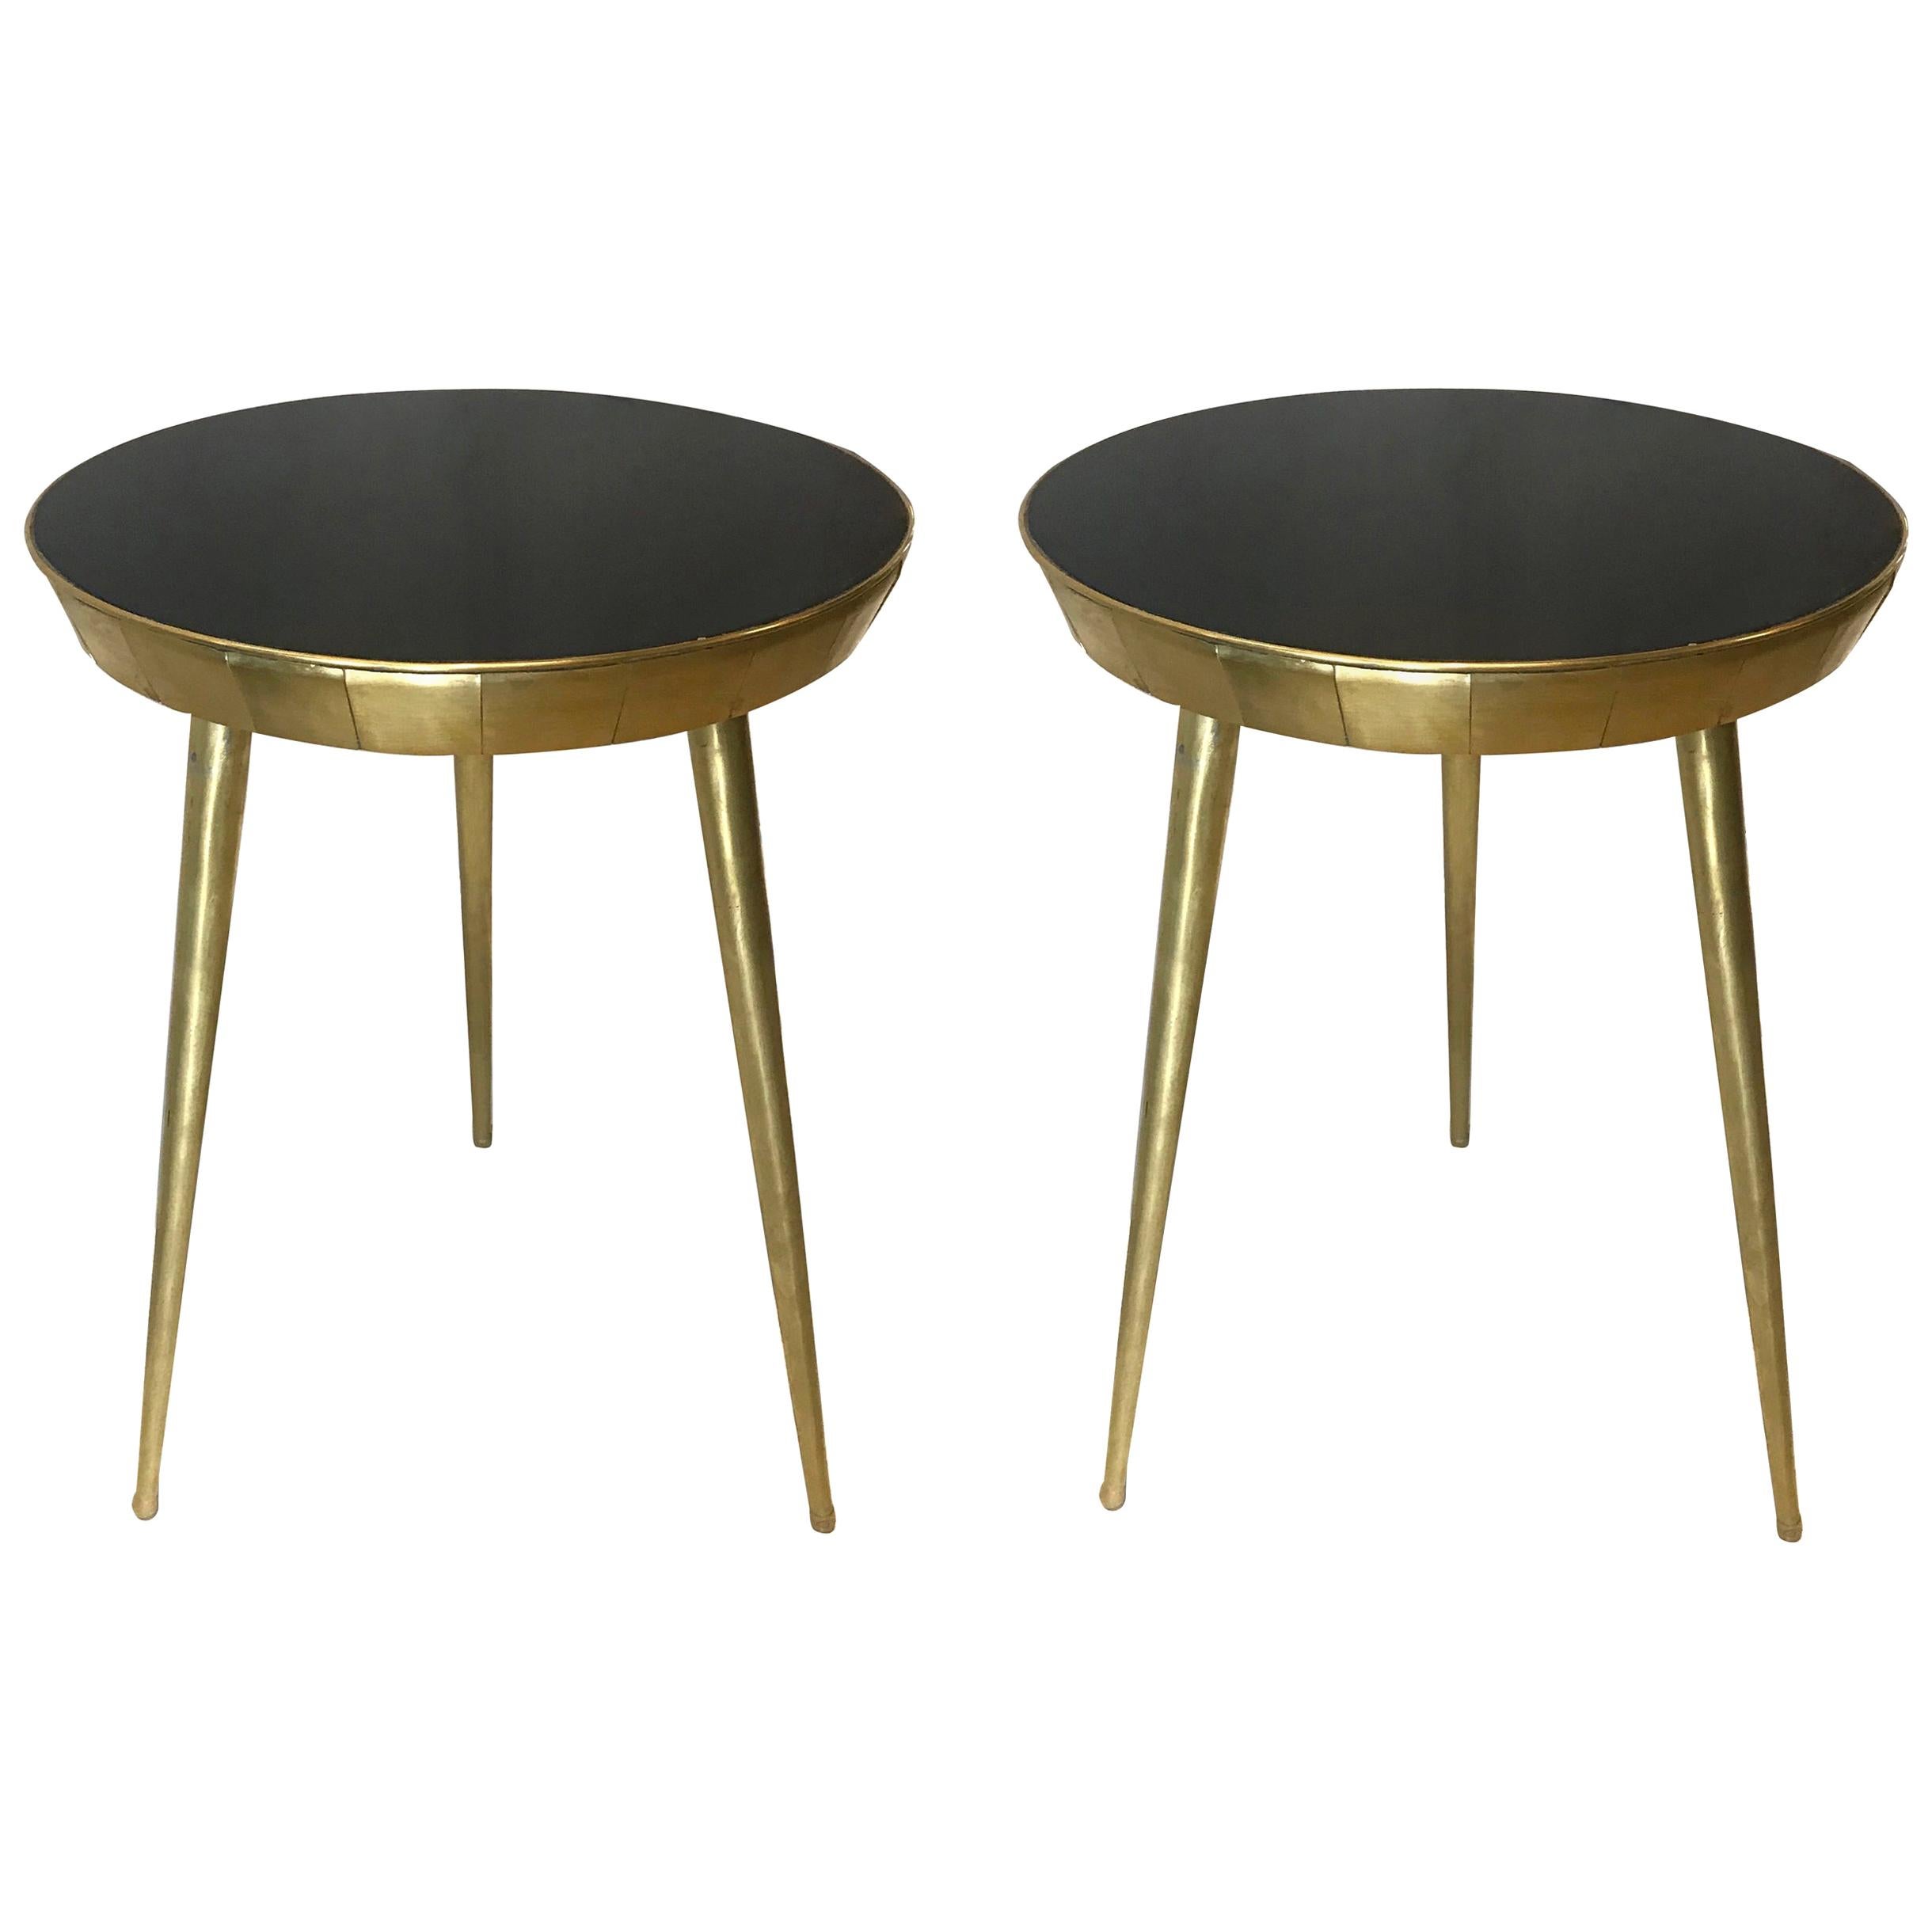 Pair of Italian Black Glass and Brass Accent Tables